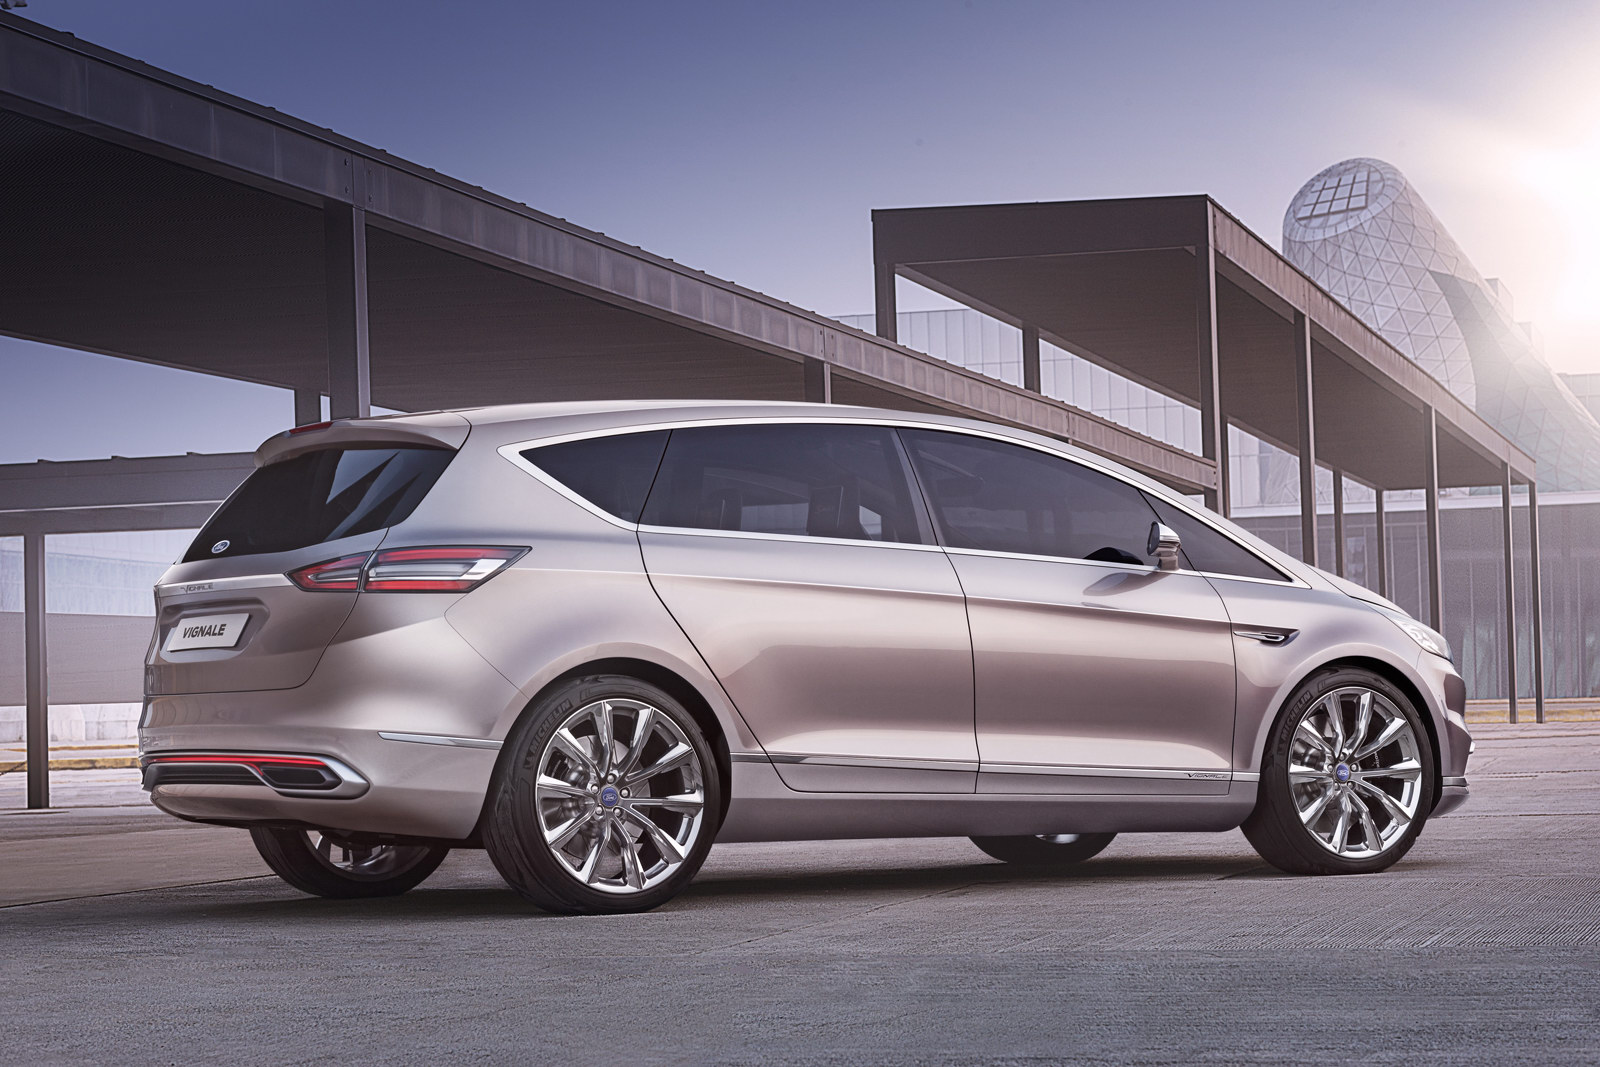 Ford Gives the Vignale Treatment to S-MAX Concept, Arrives in 2015  [w/Videos]